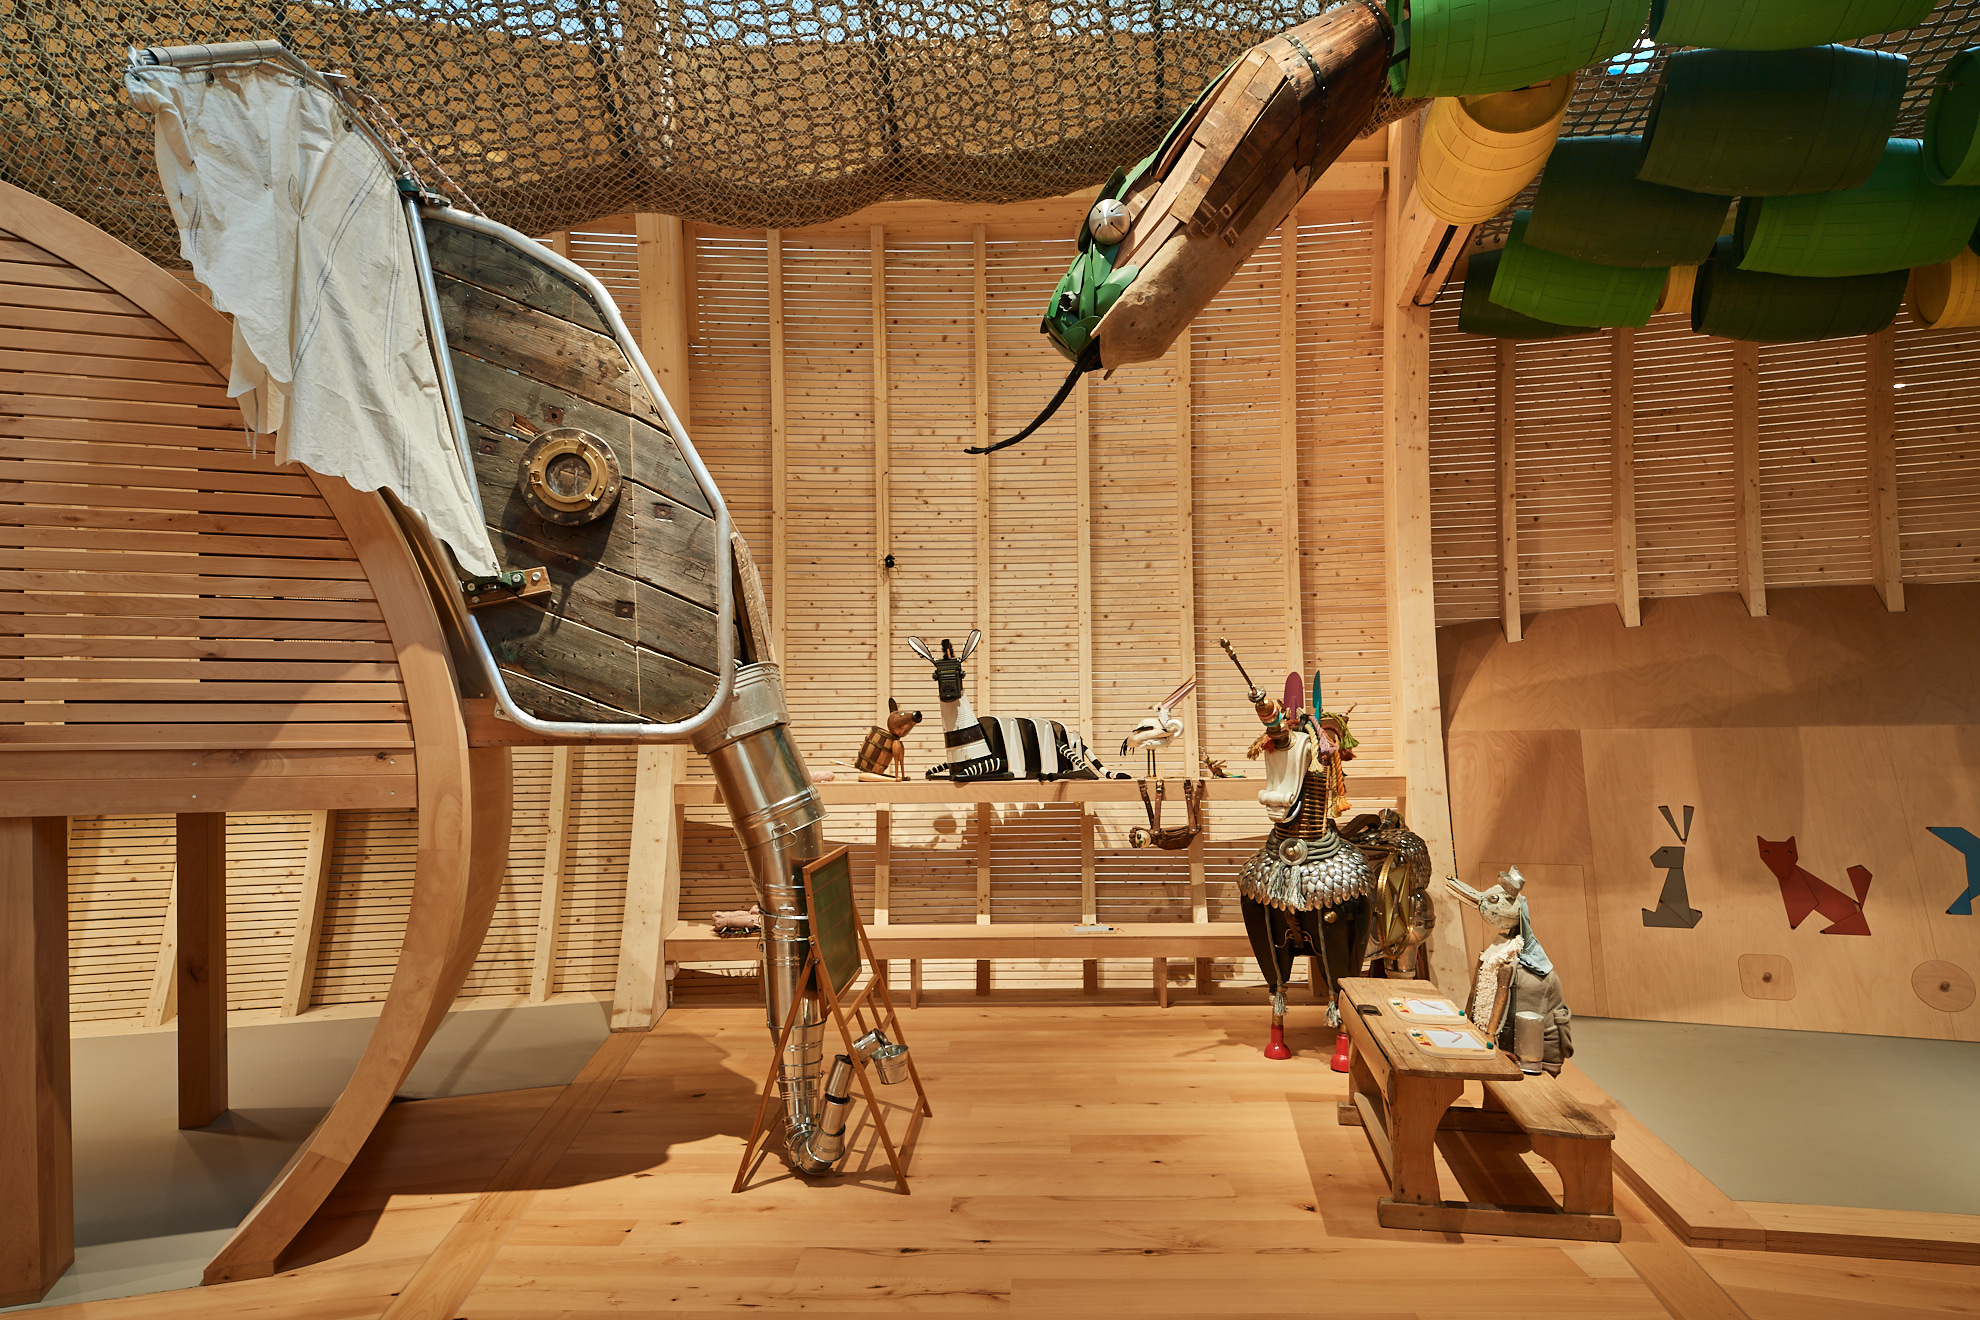 (150 animal sculptures bring to life the story of Noah's Ark in the children's museum)